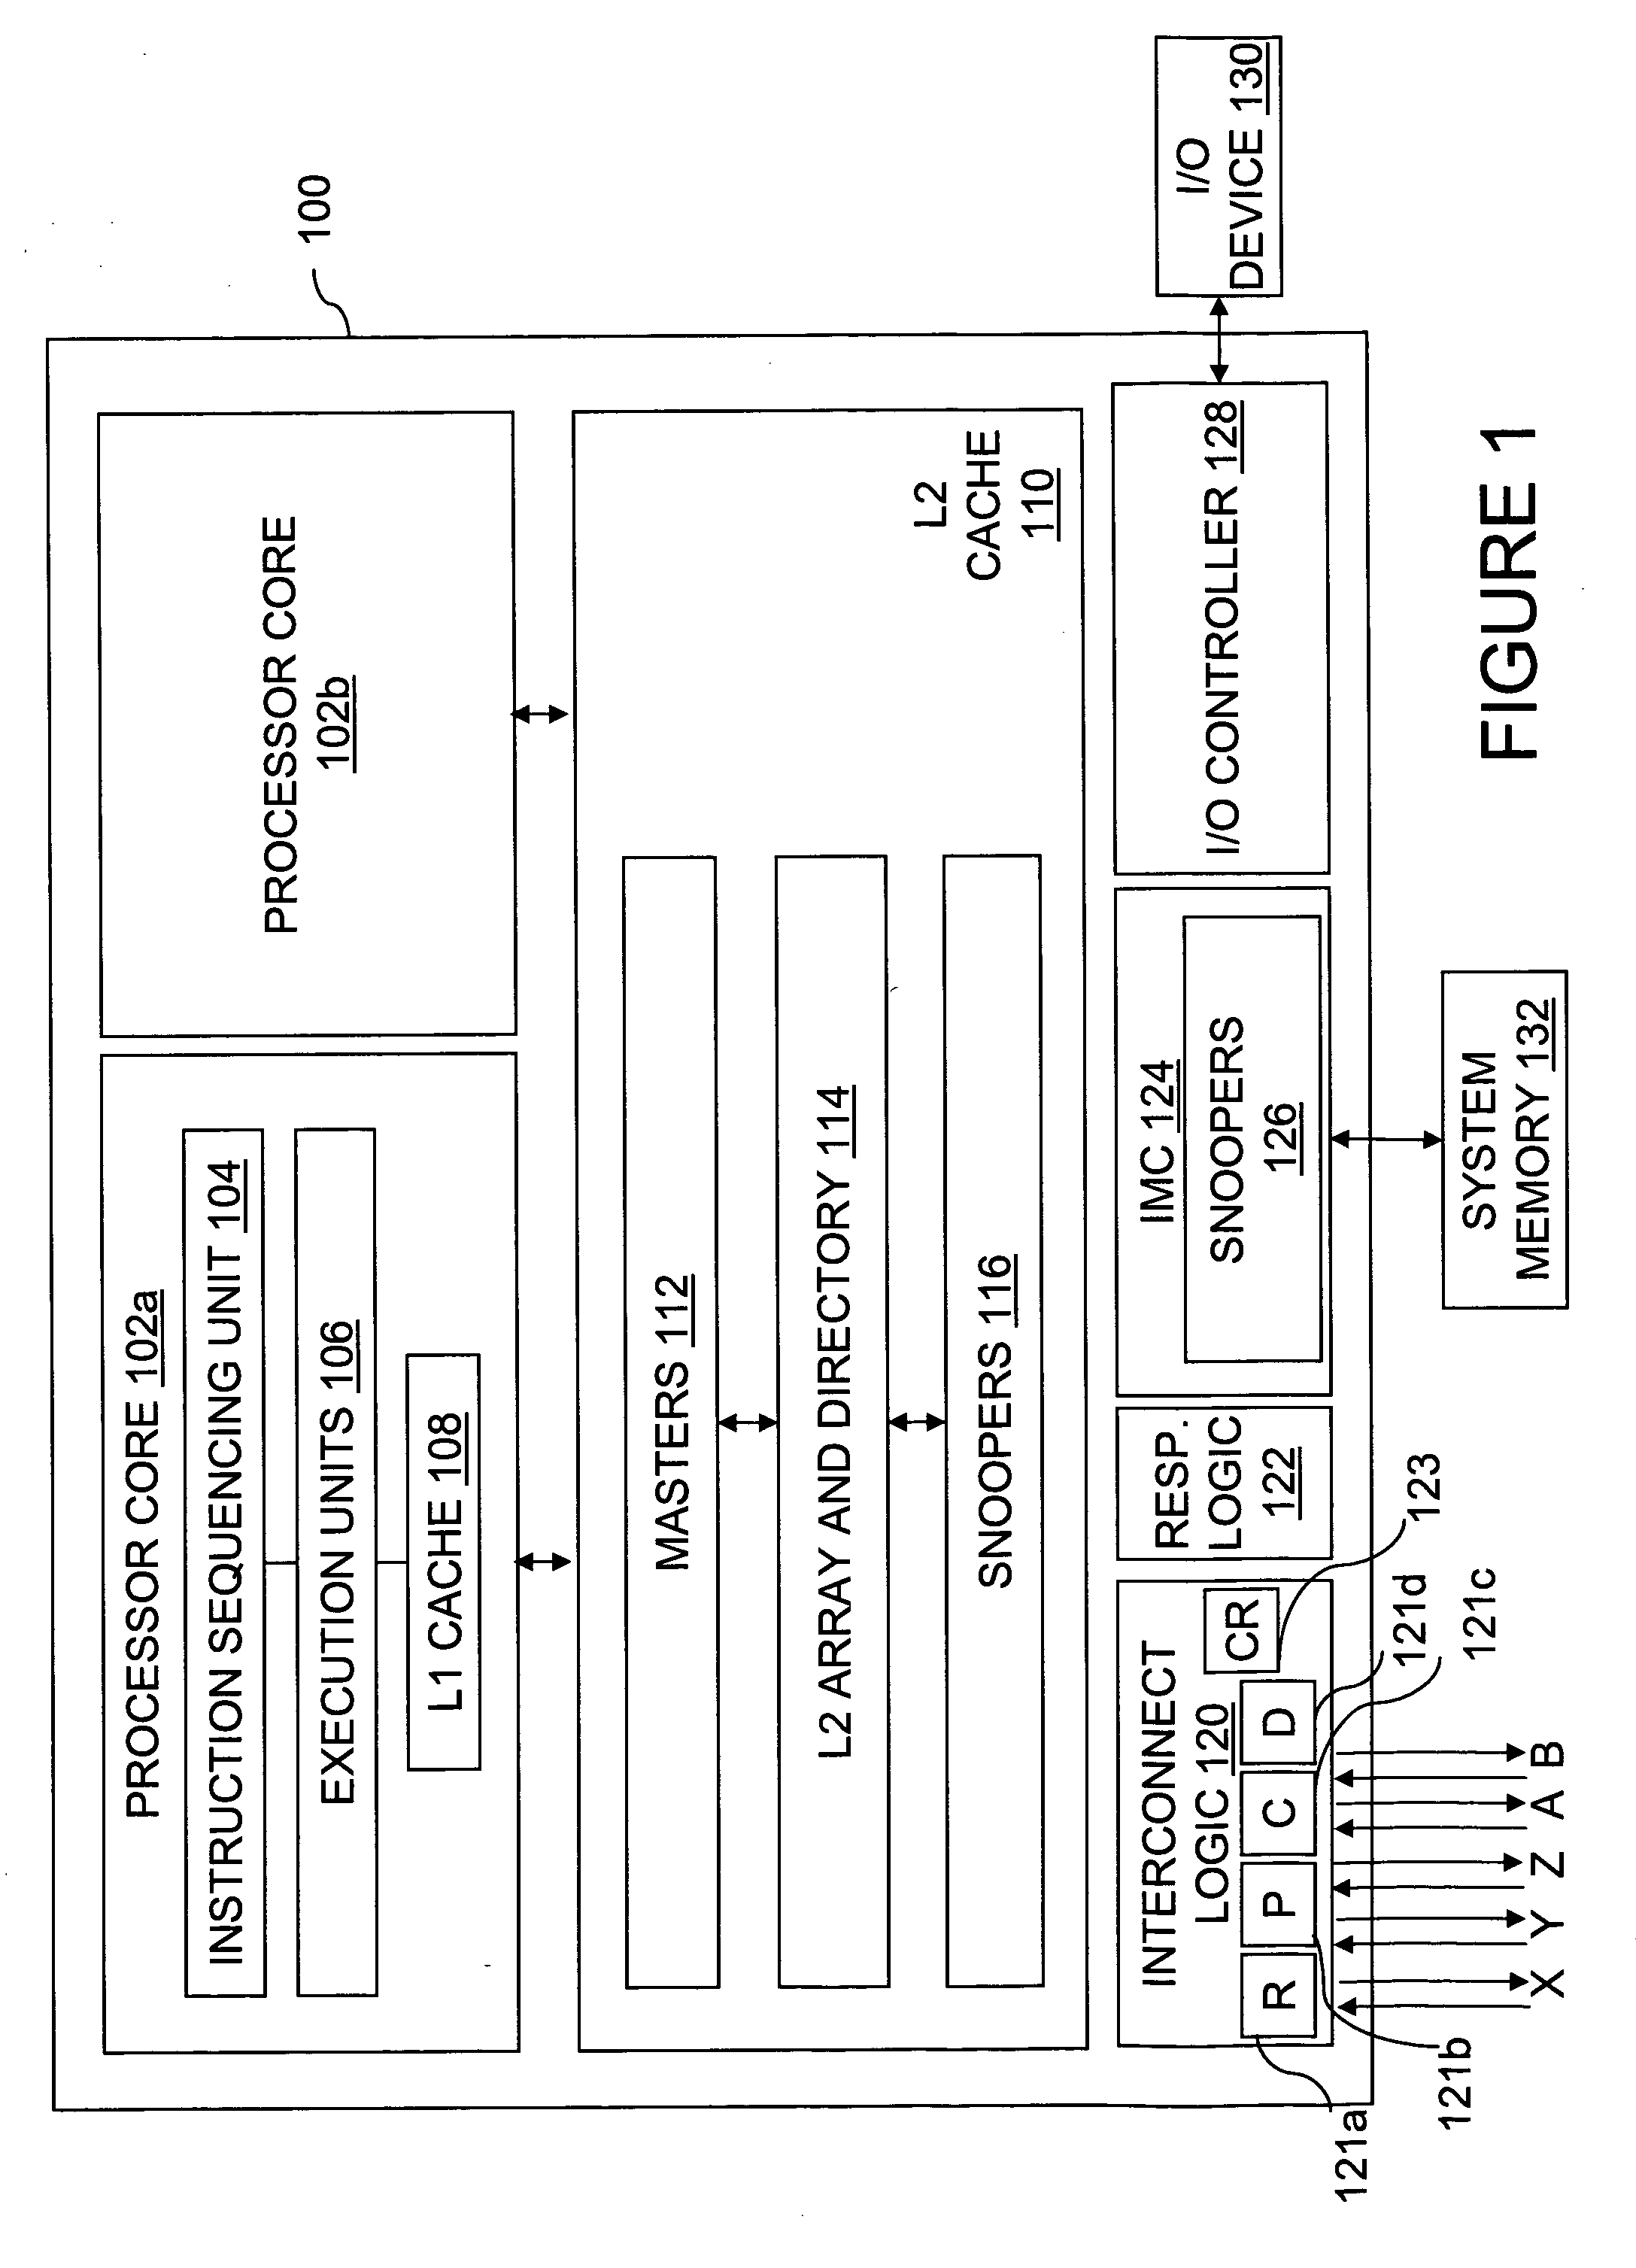 Data processing system, method and interconnect fabric that protect ownership transfer with a protection window extension